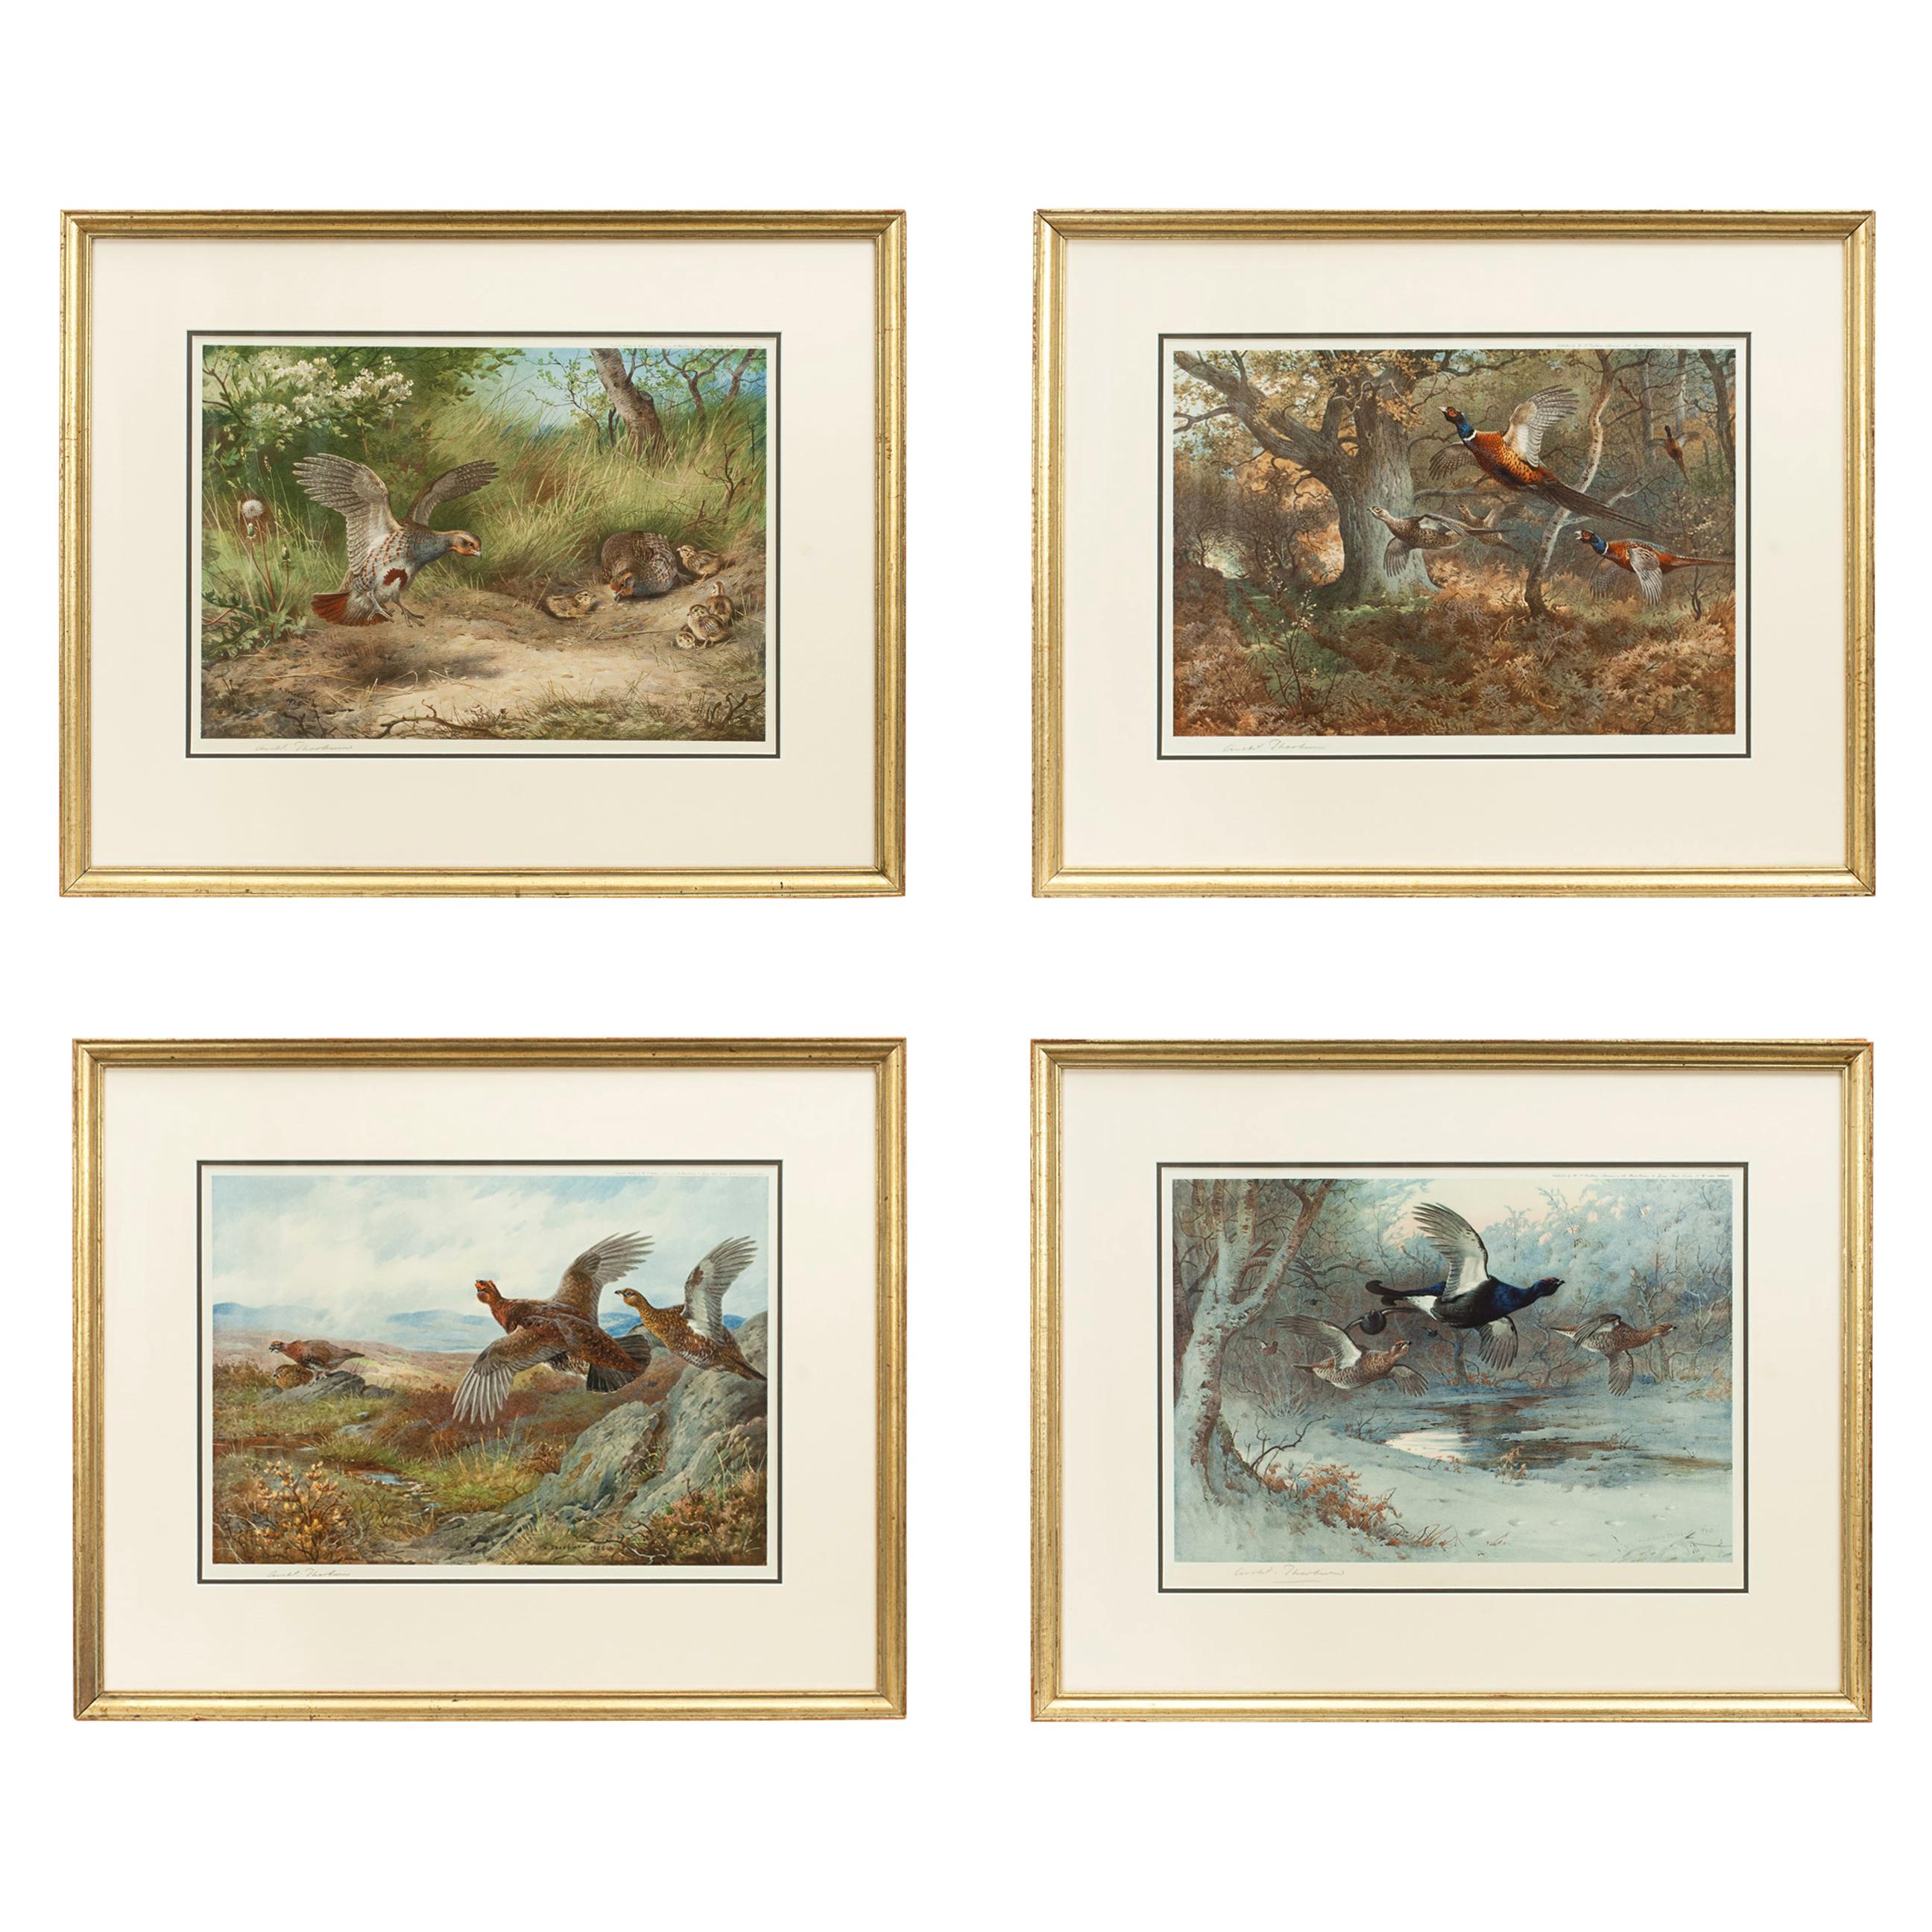 Vintage Game Bird Prints, Colotypes by Archibald Thorburn 'The Seasons'